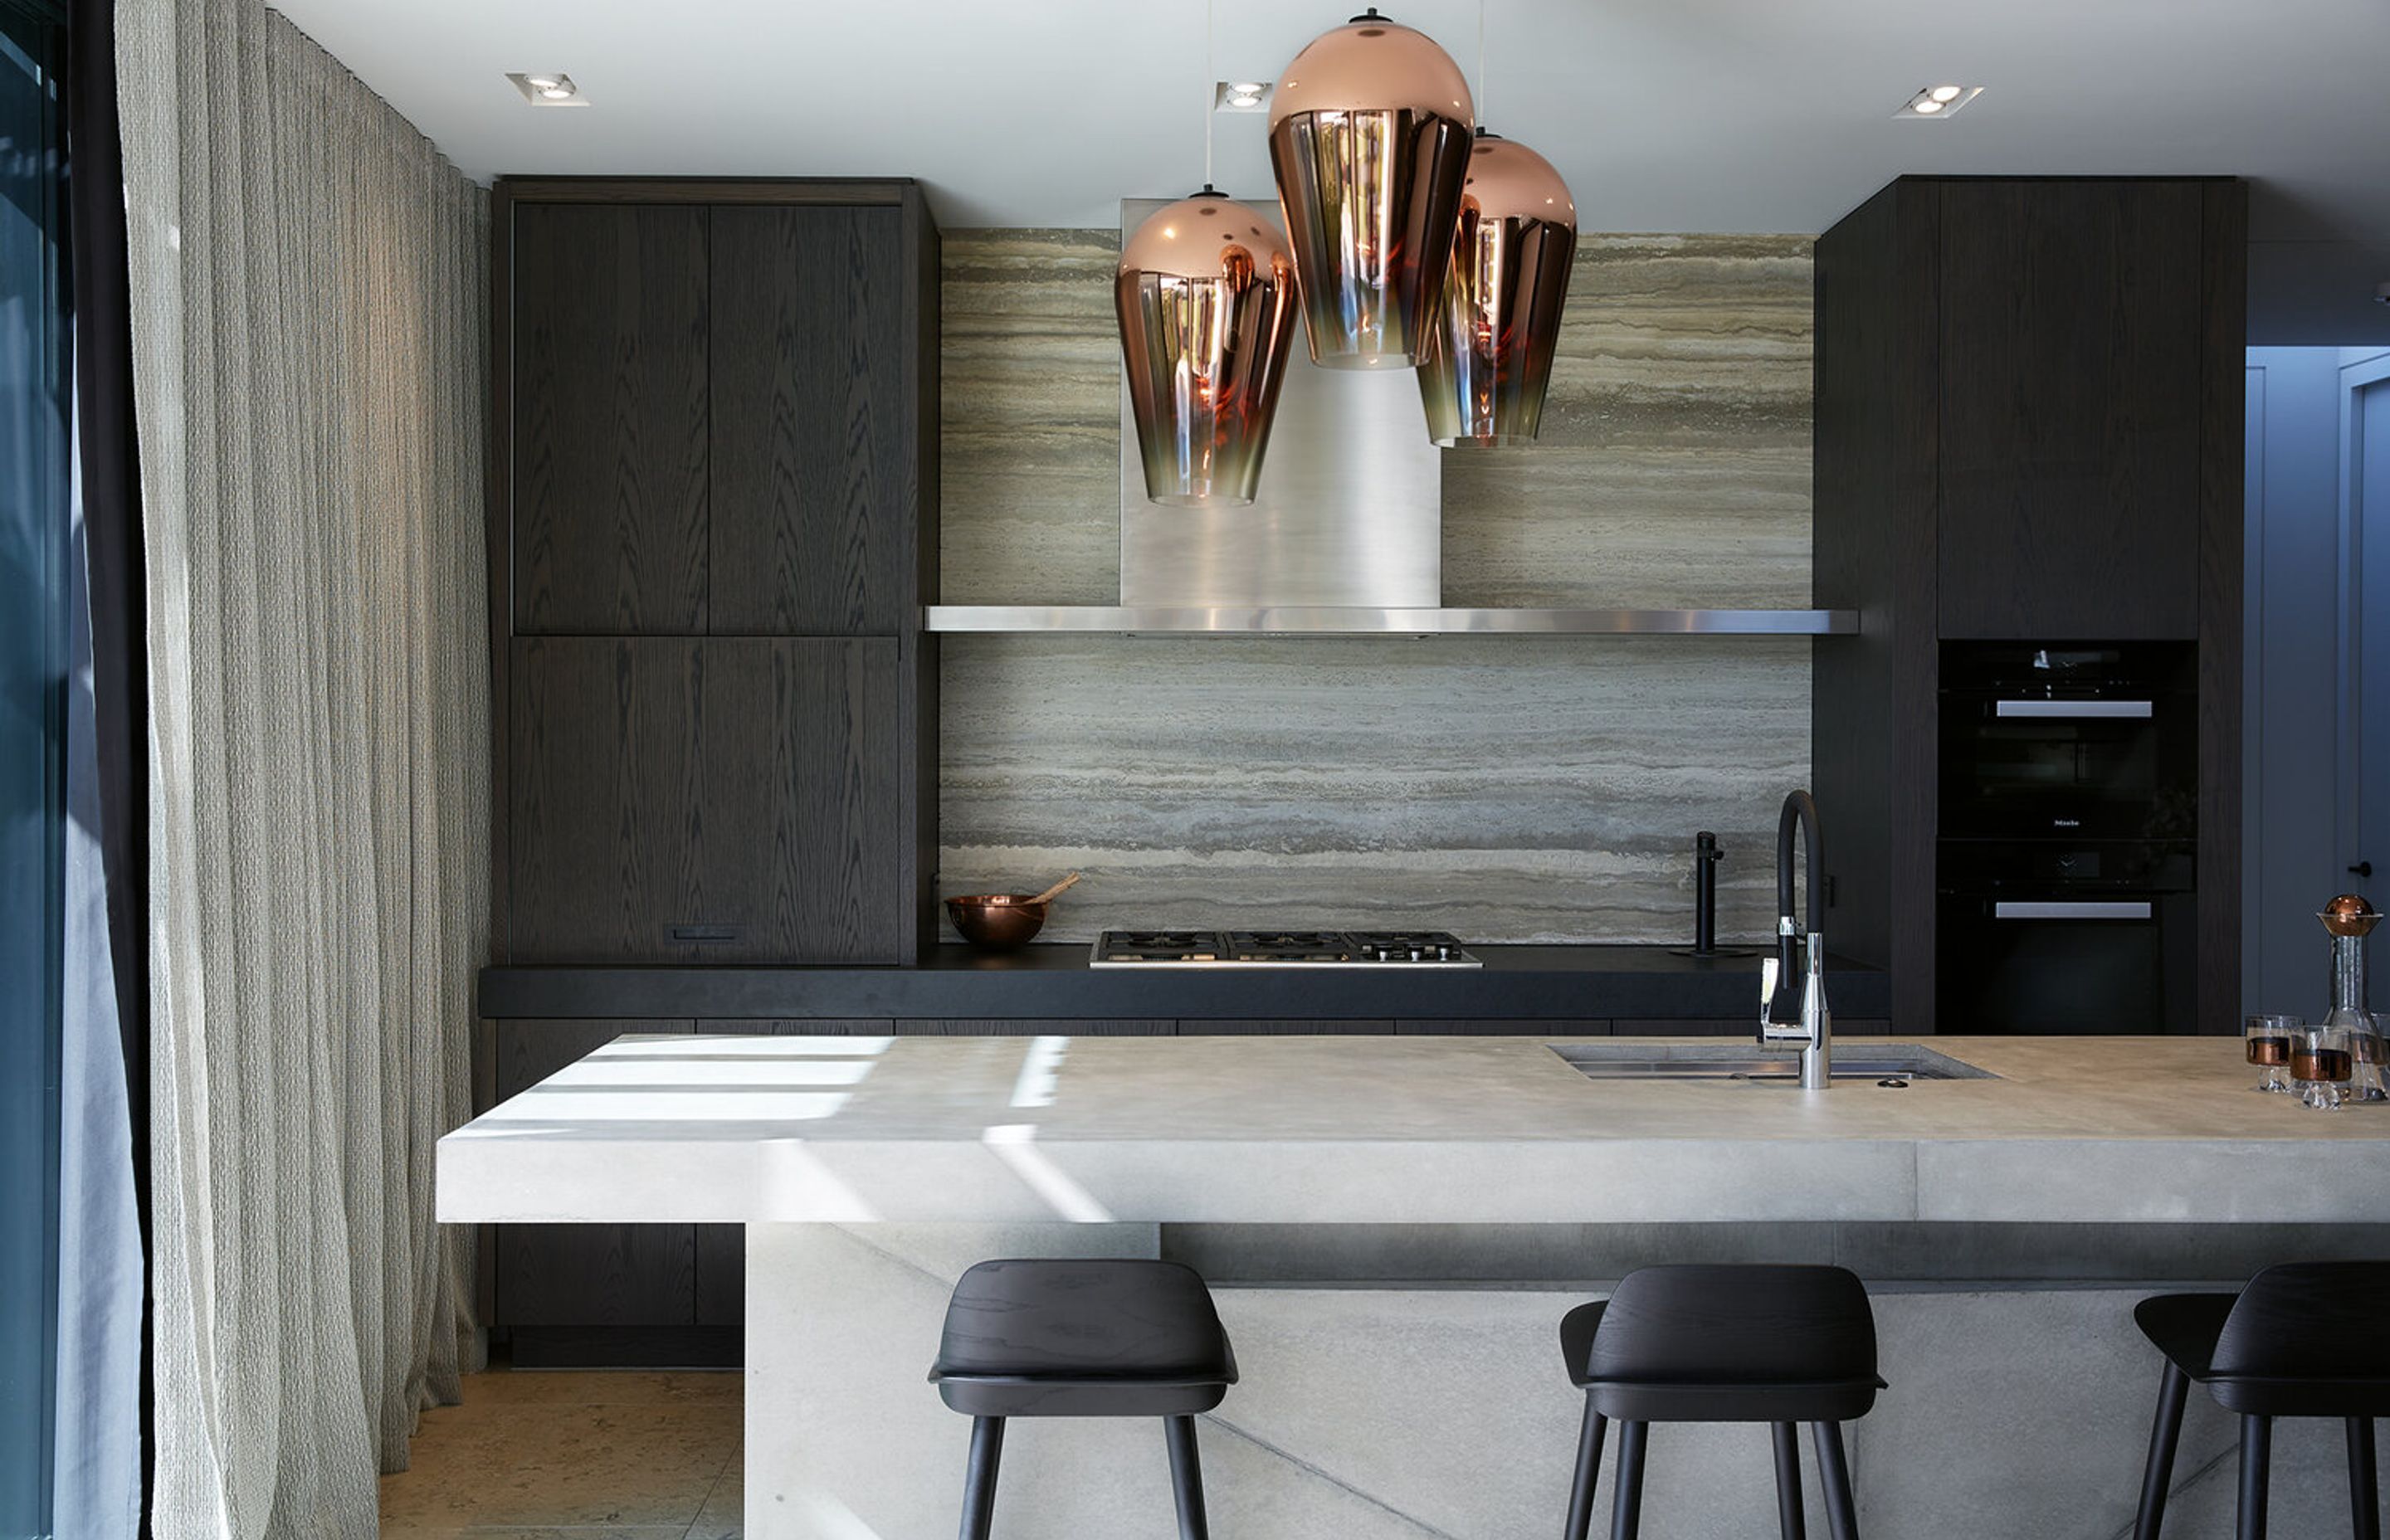 The concrete kitchen island acts as a "rocky outcrop" in the centre of the living/dining space.